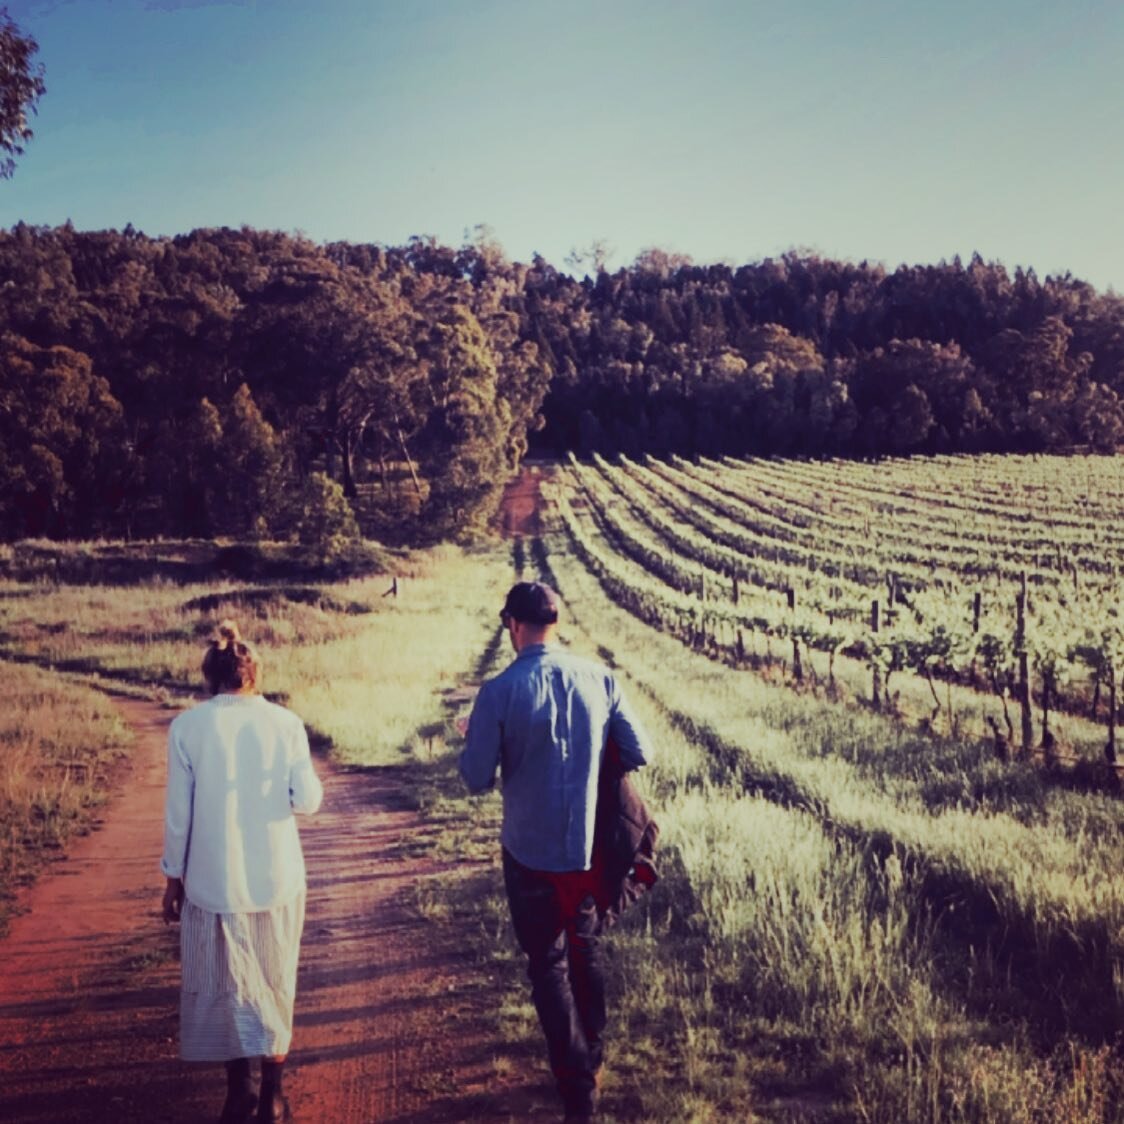 Walking to Friday drinks @rosbymudgee with @mwemma and ANK after a monster week. A few very exciting things to share over the coming weeks including some developments on our portfolio of micro tourist accommodation projects. Big thanks to the CAARCH 